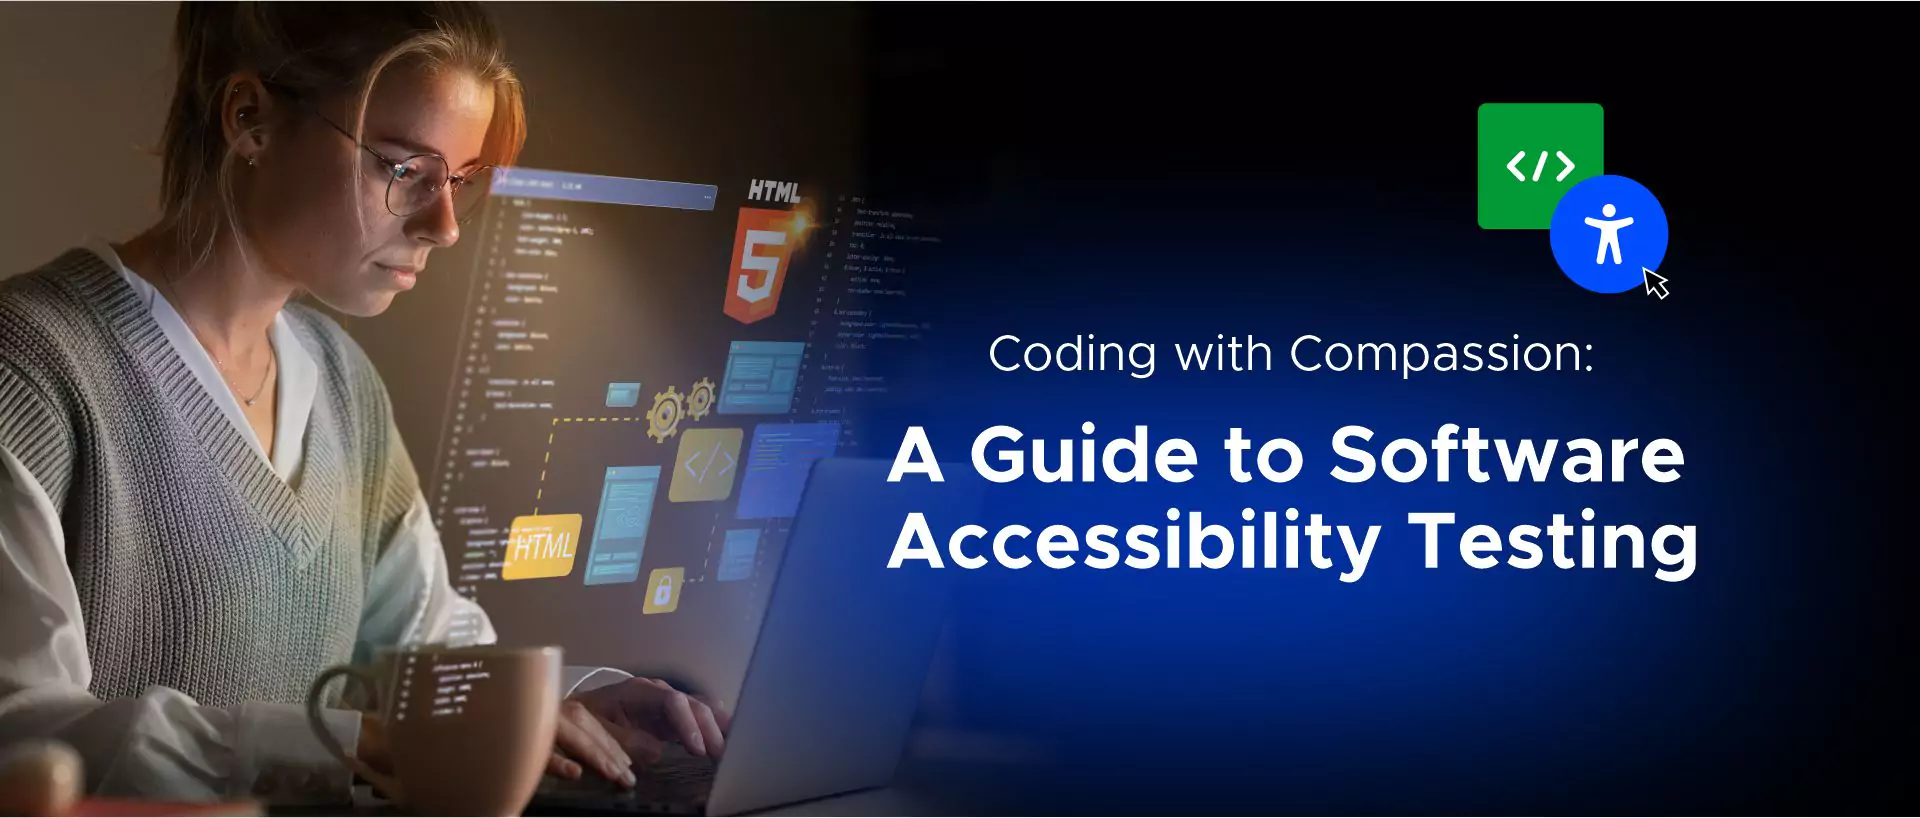 Coding with Compassion: A Guide to Software Accessibility Testing